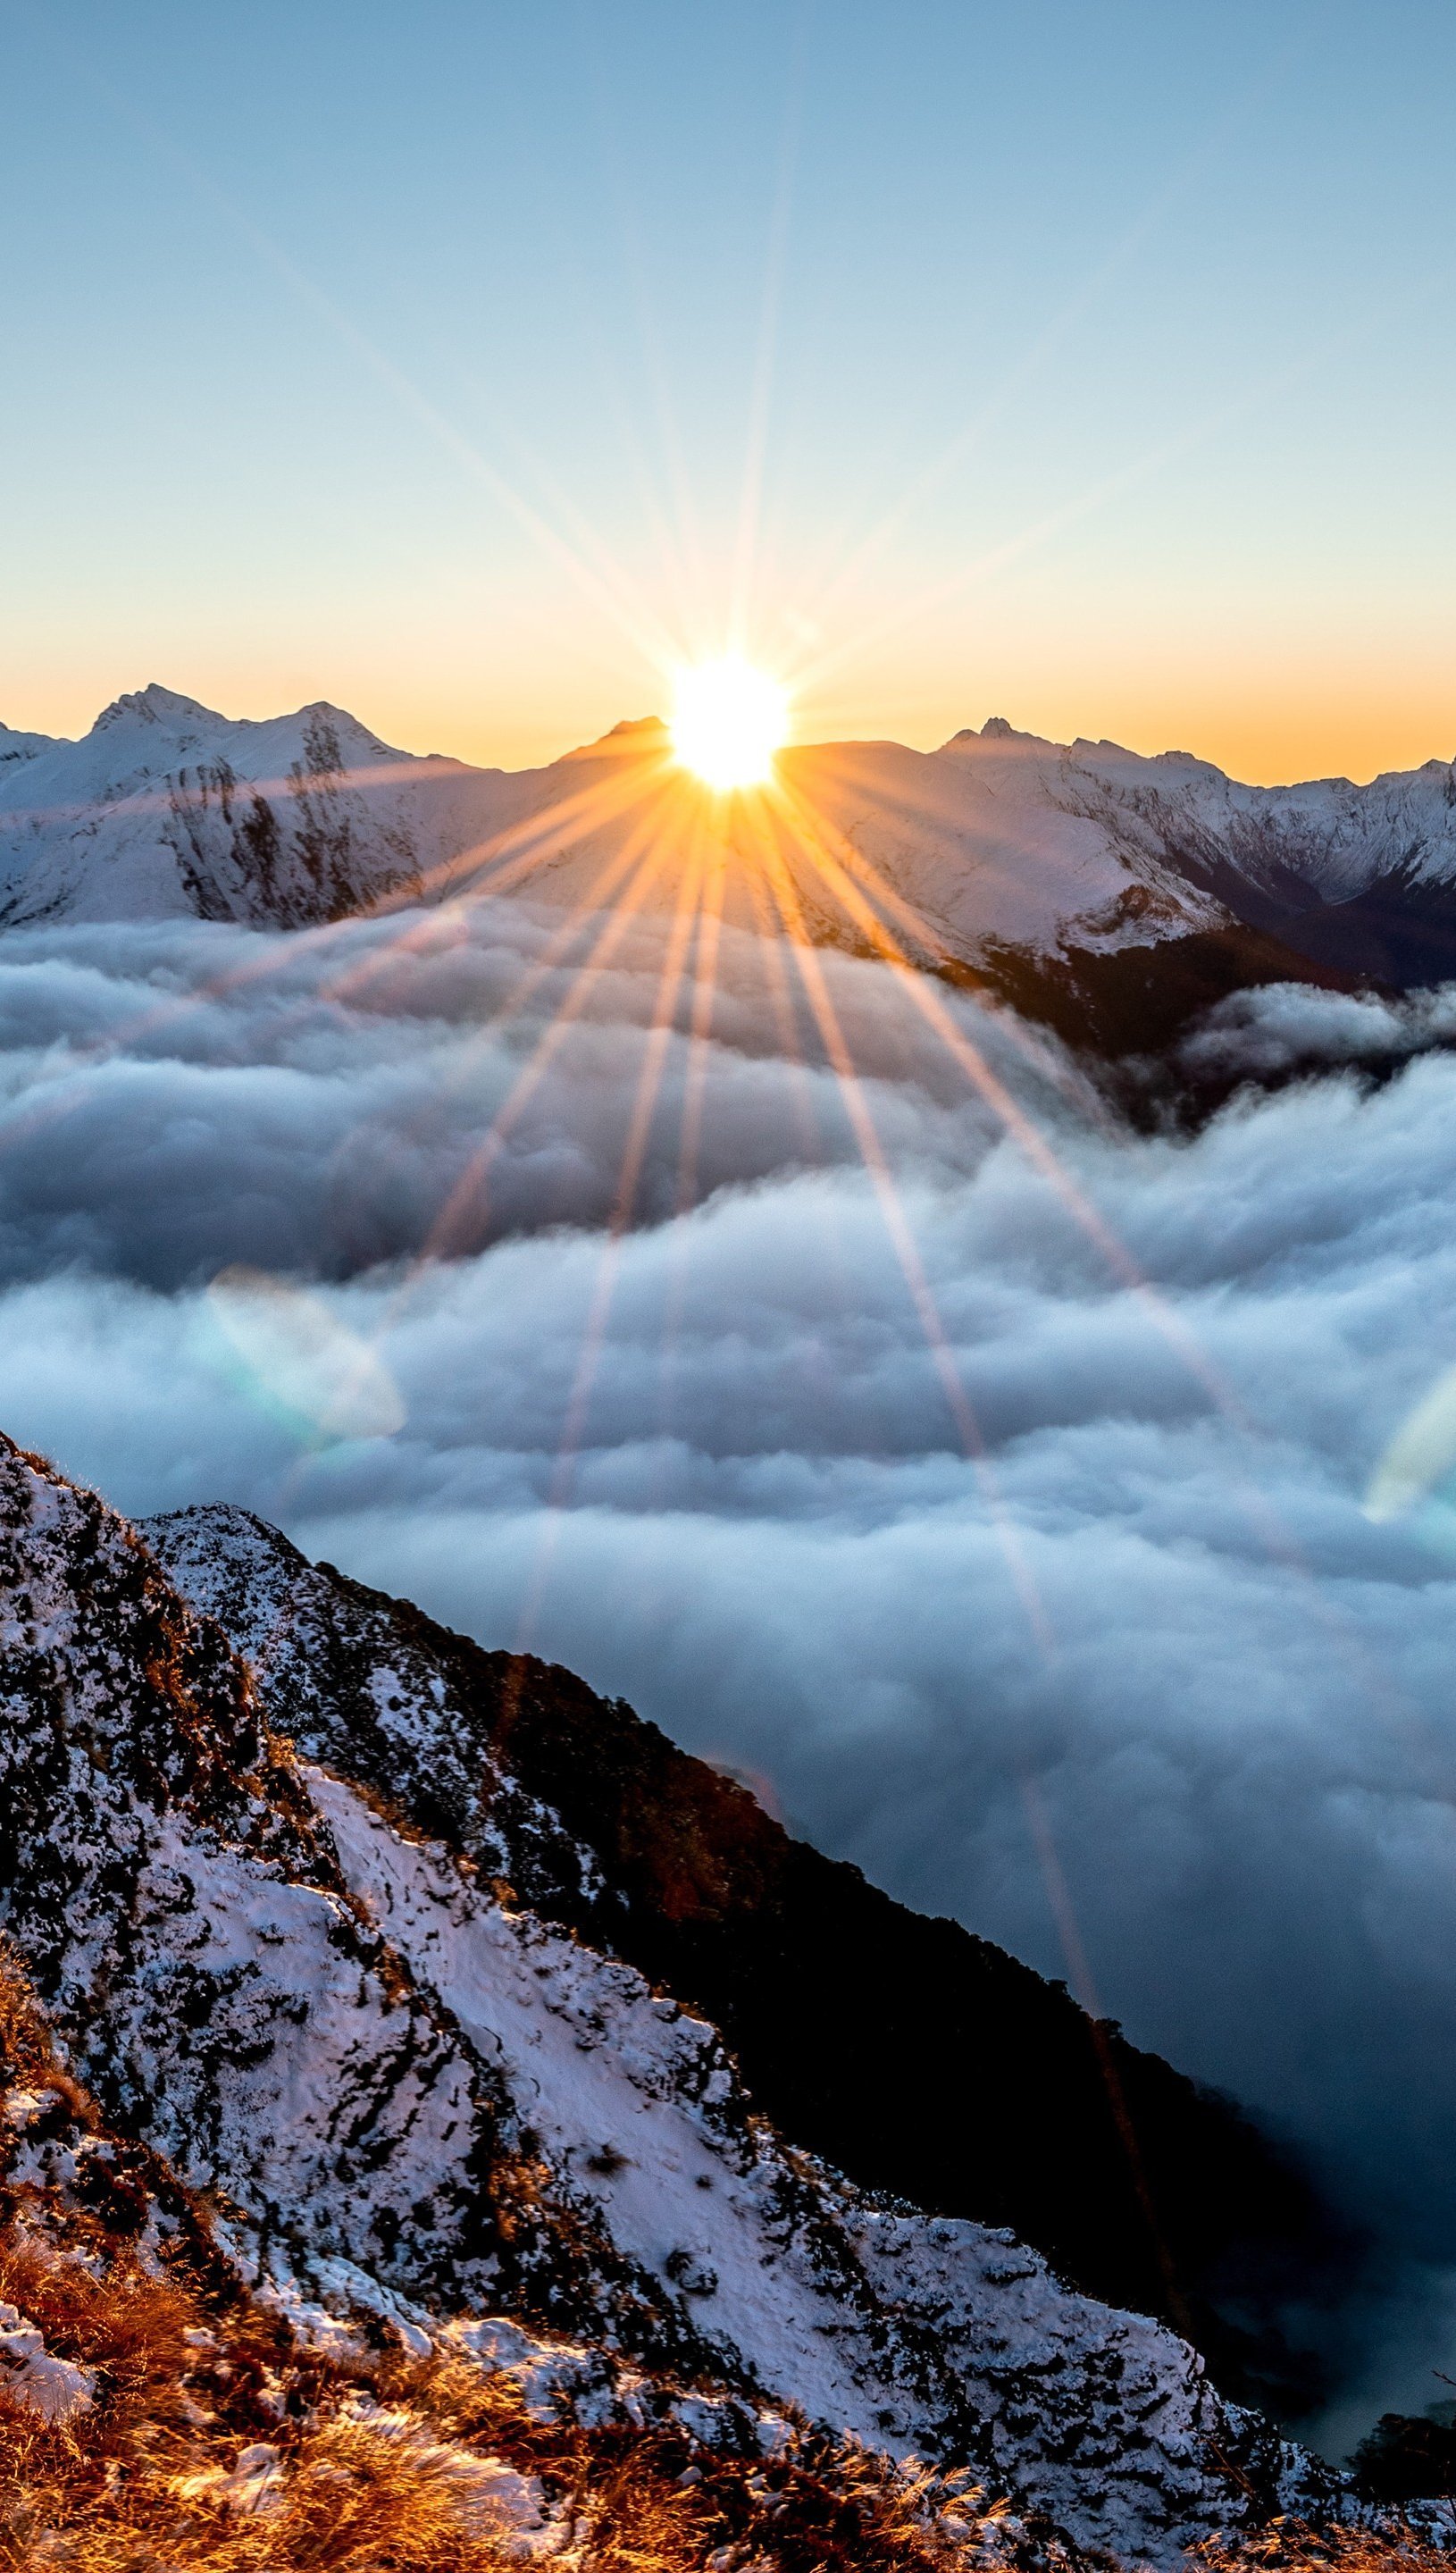 Fog over the mountains at sunrise Wallpaper 5k Ultra HD ID:9526